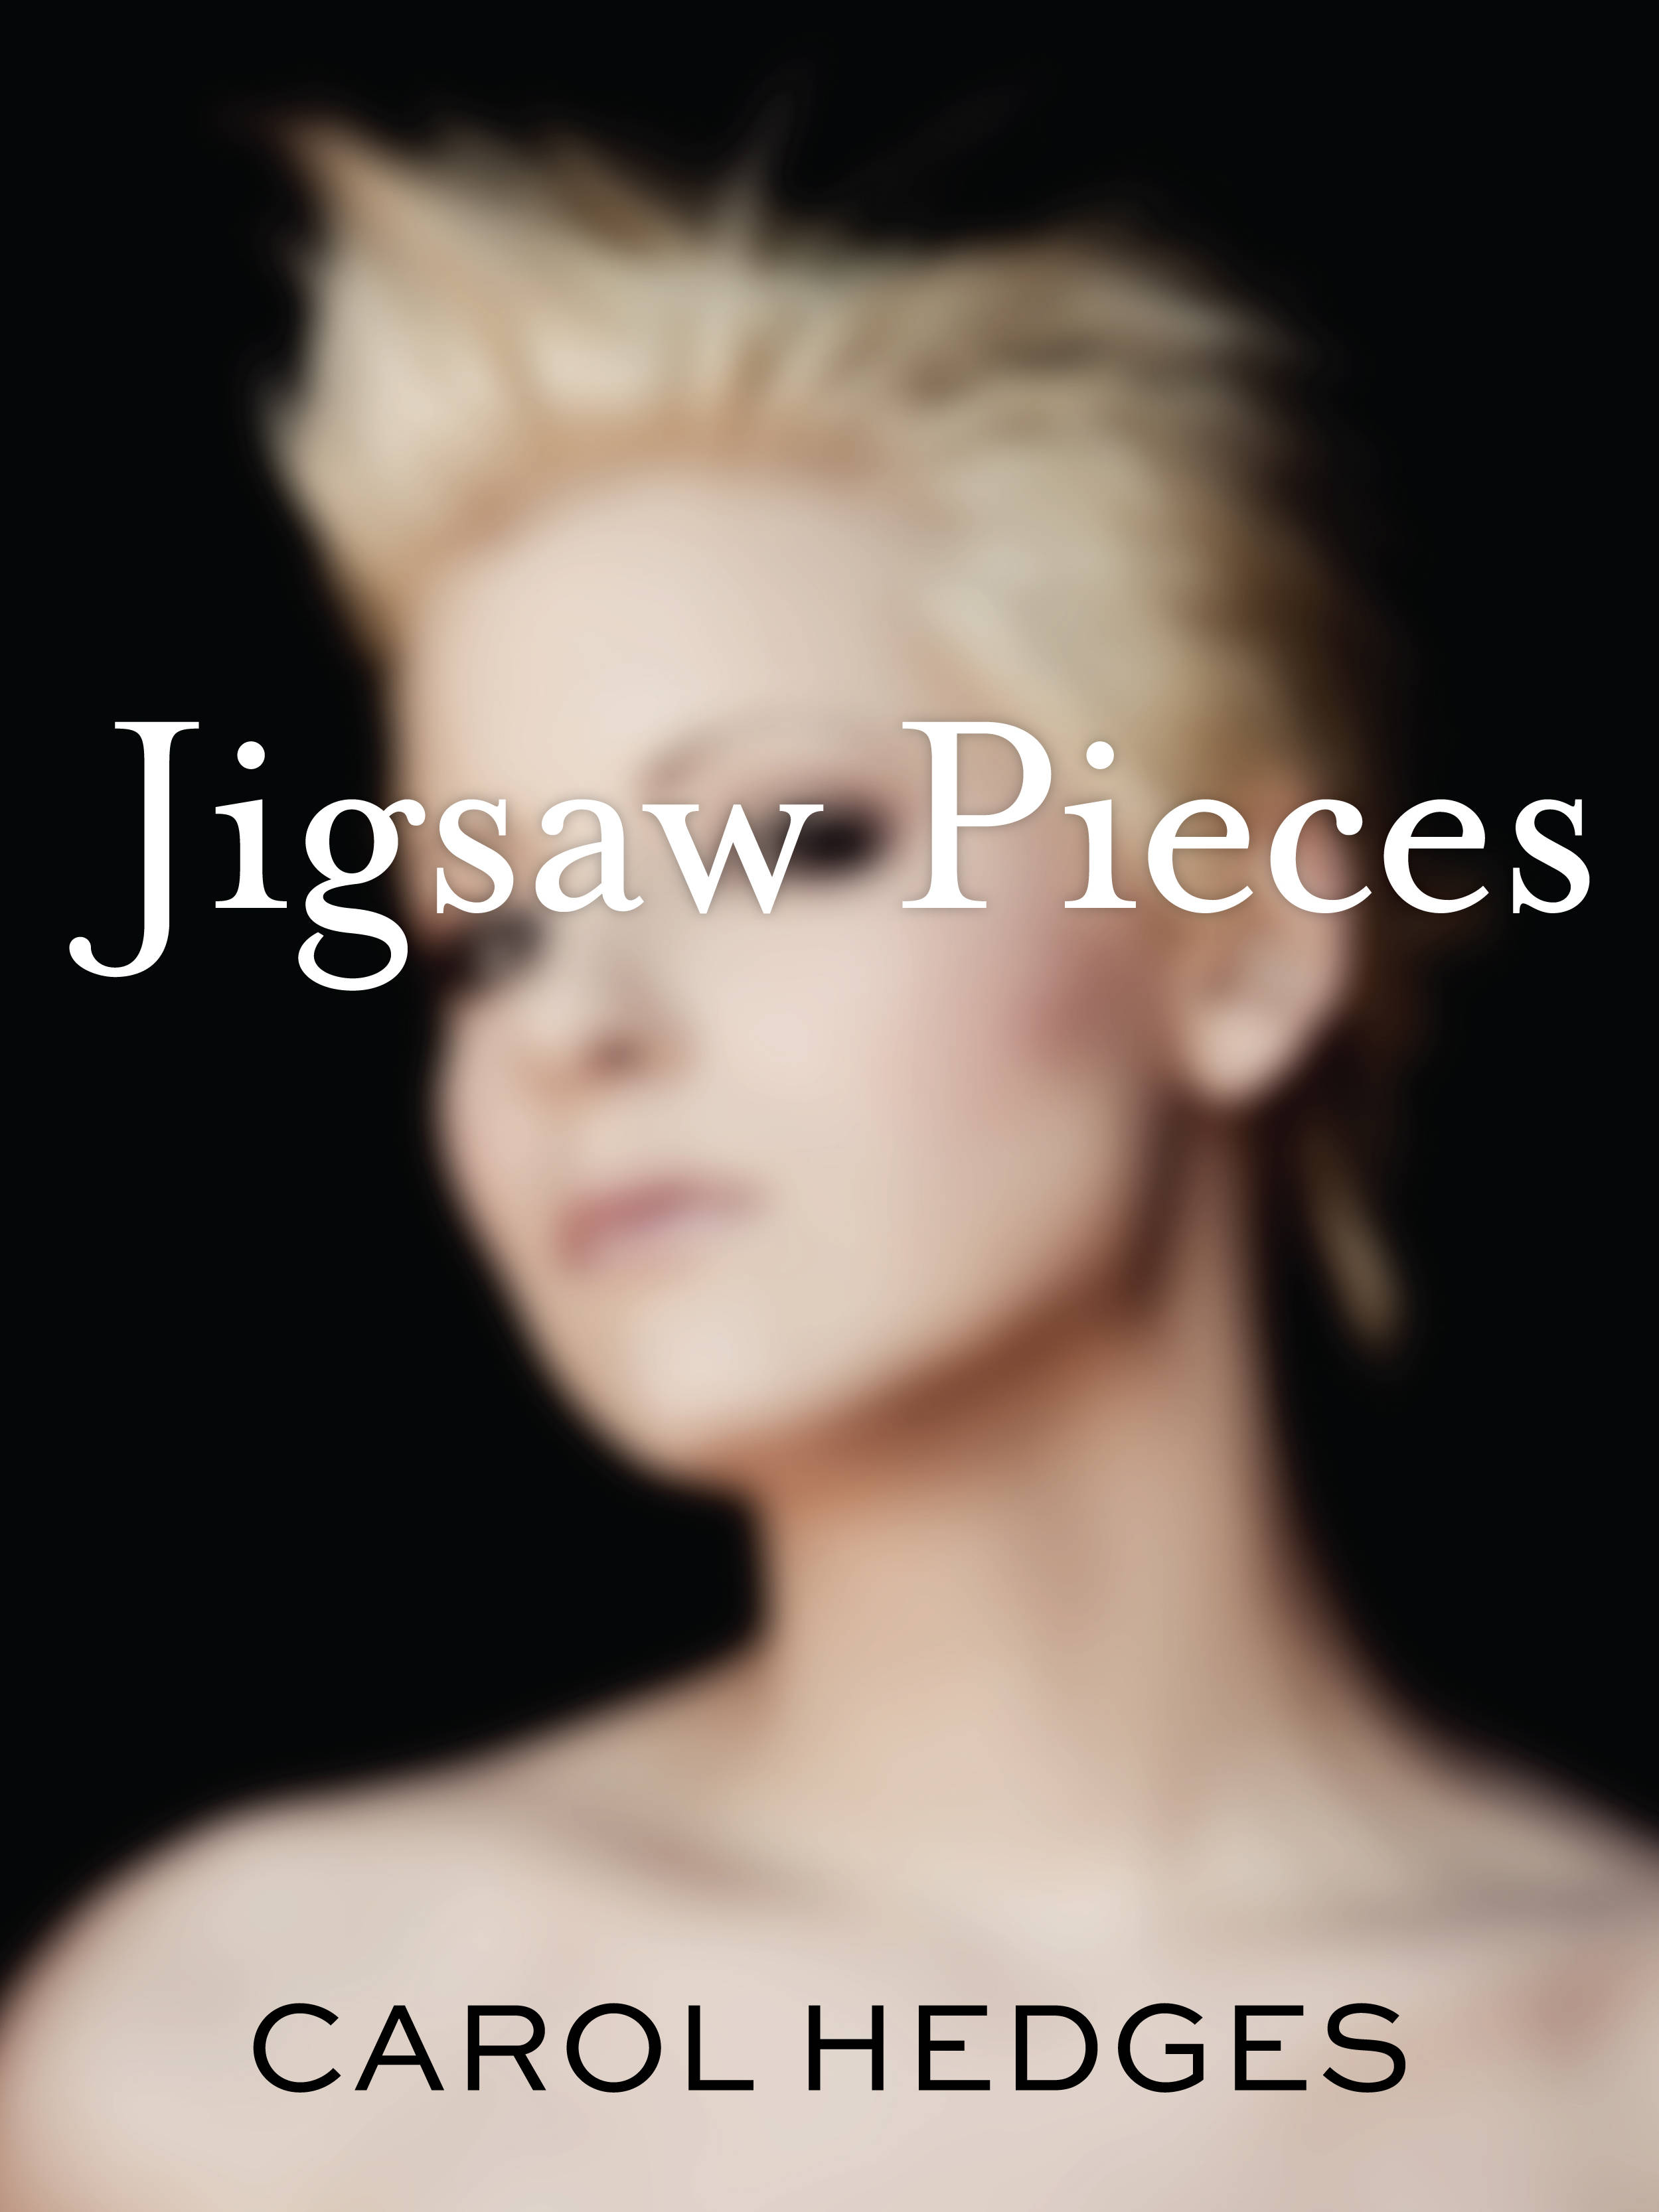 Image of book cover jigsaw pieces carol hedges <h2>2012-09-04 - Special Guest - Carol Hedges</h2>